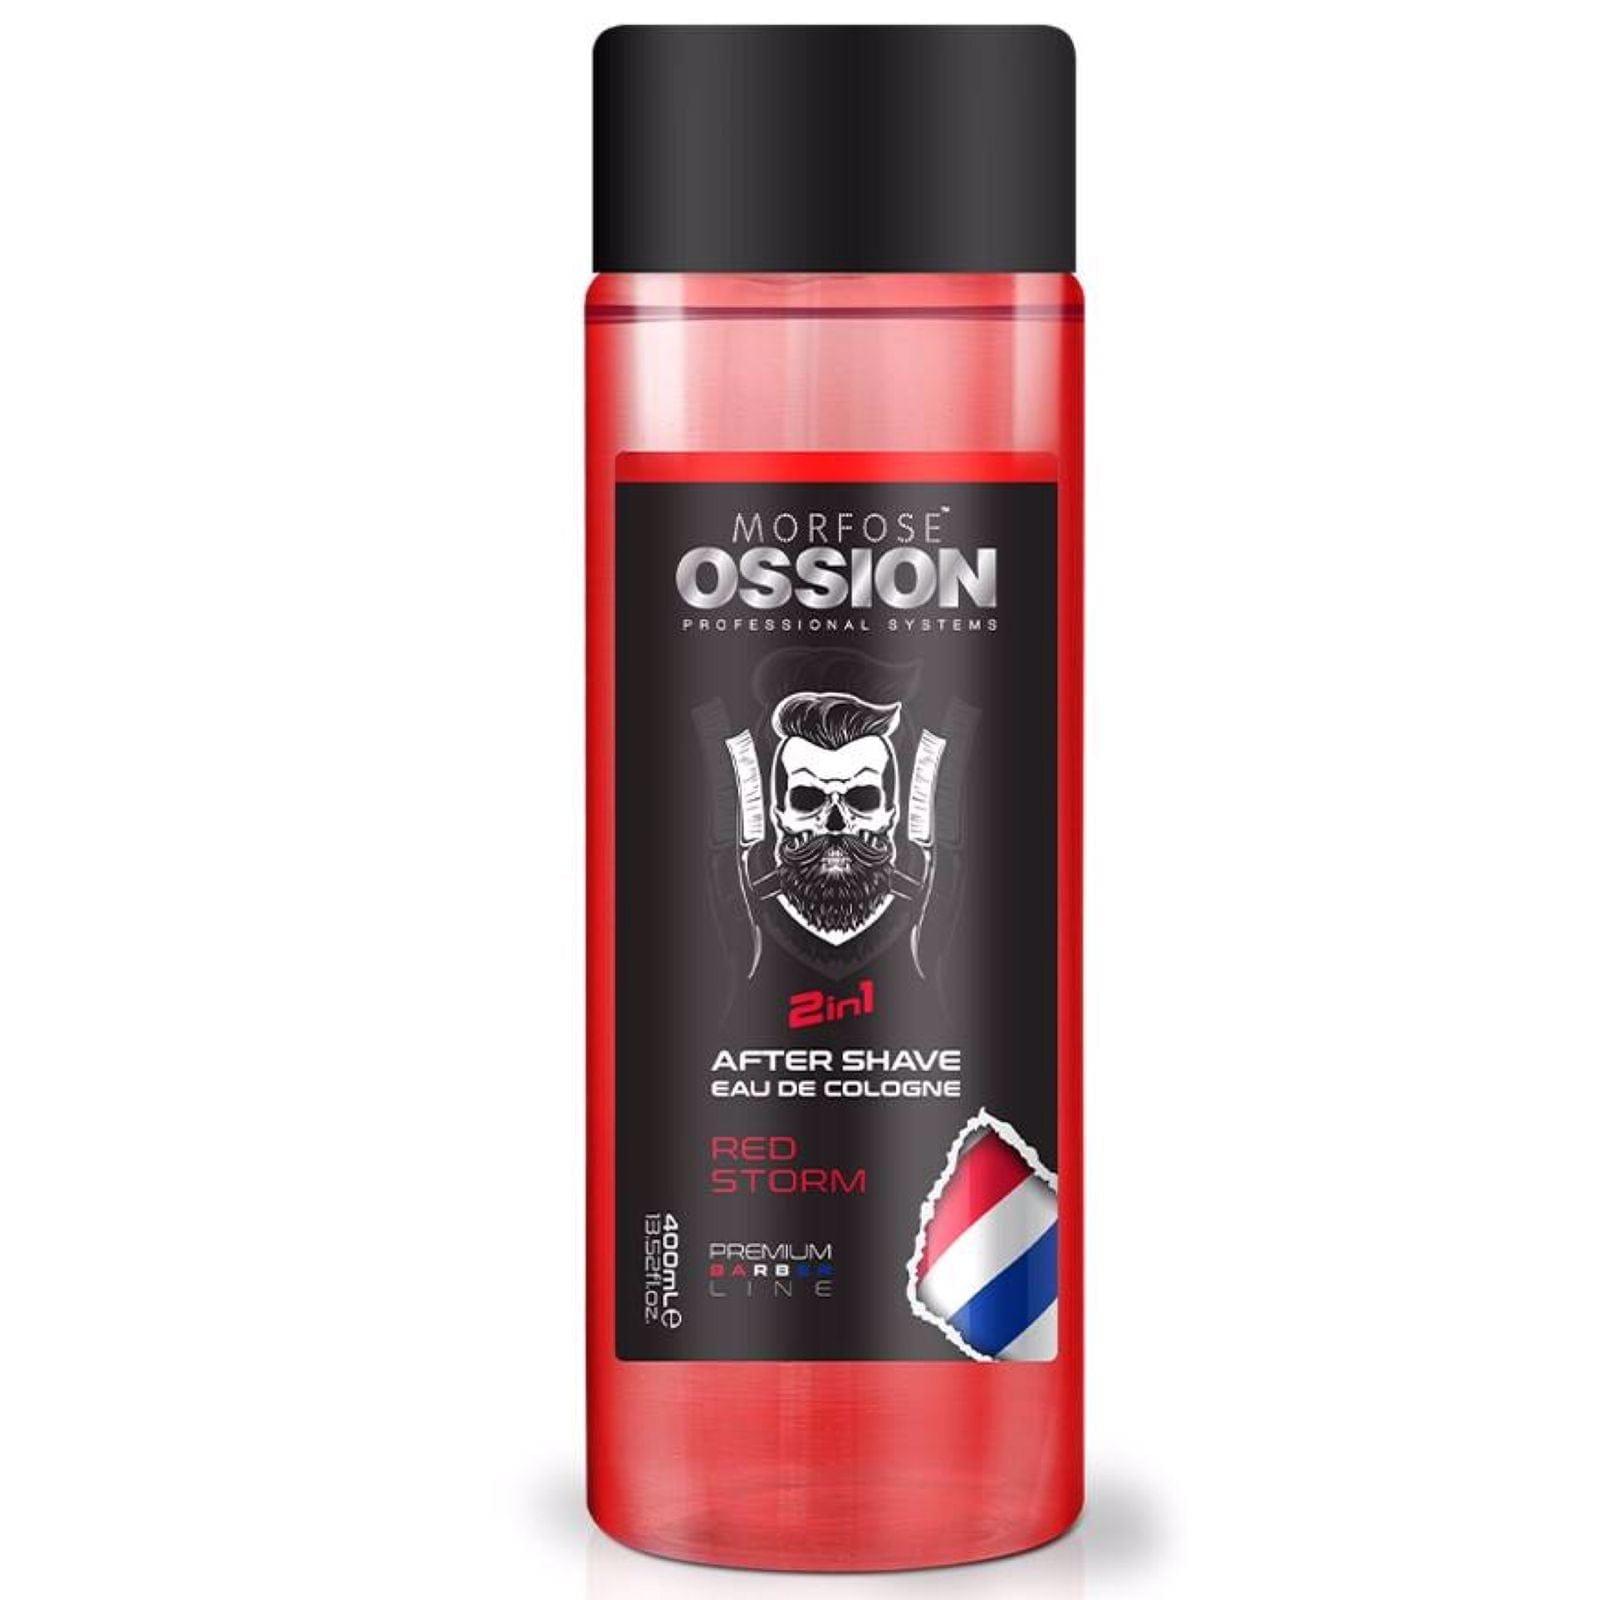 Morfose Ossion 2 in 1 After Shave EAU Cologne Red Storm 400ml